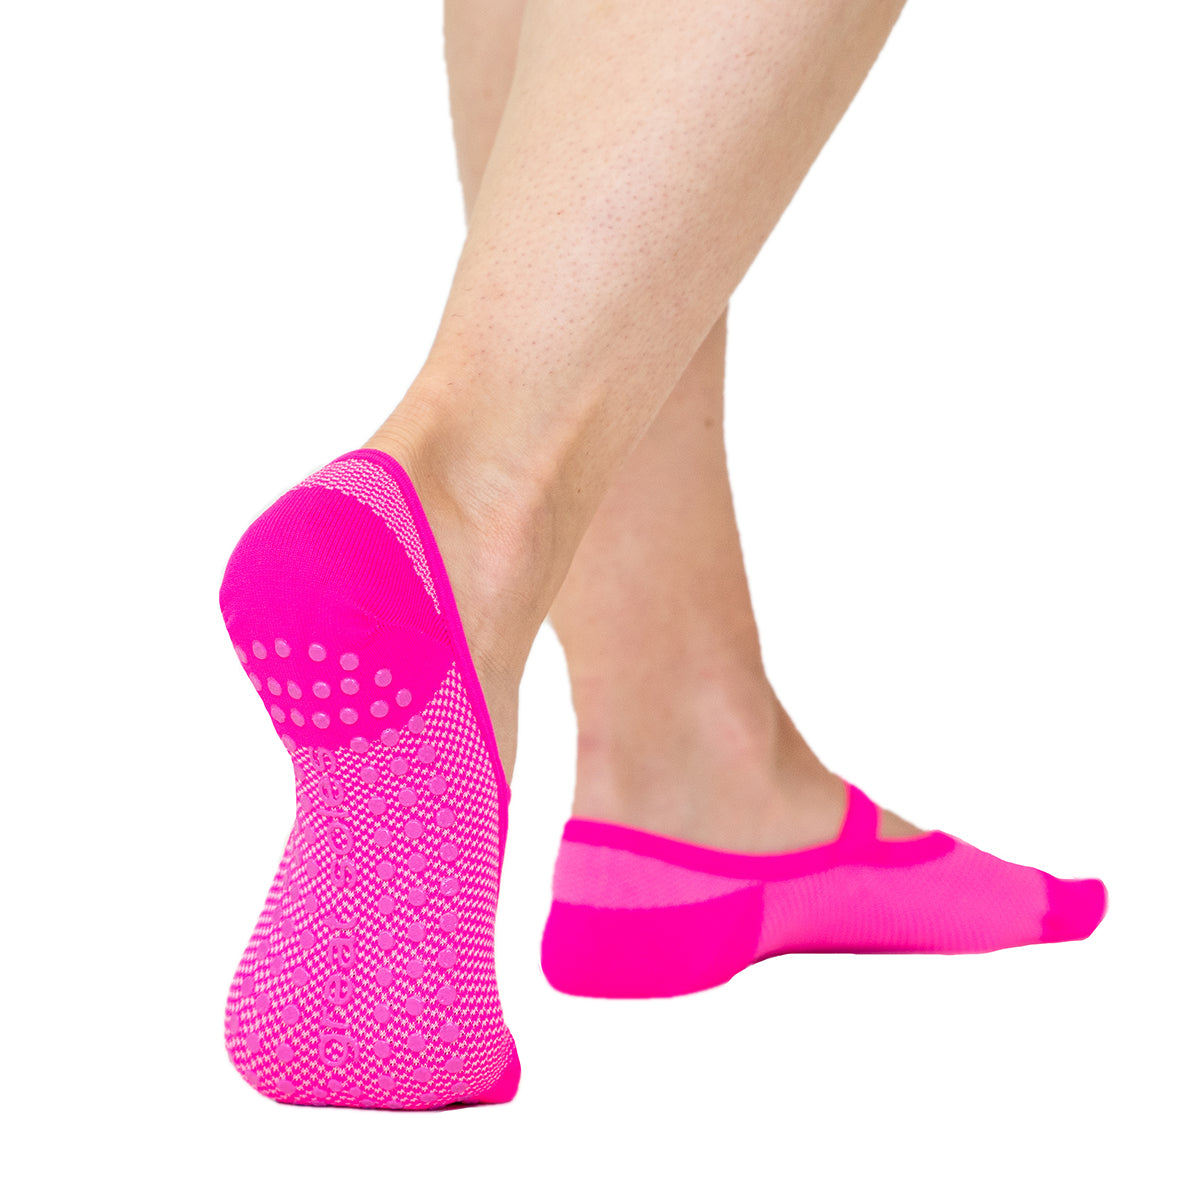 Breathable Neon Pink Mesh Grip Sock for Pilates Barre Yoga Dance